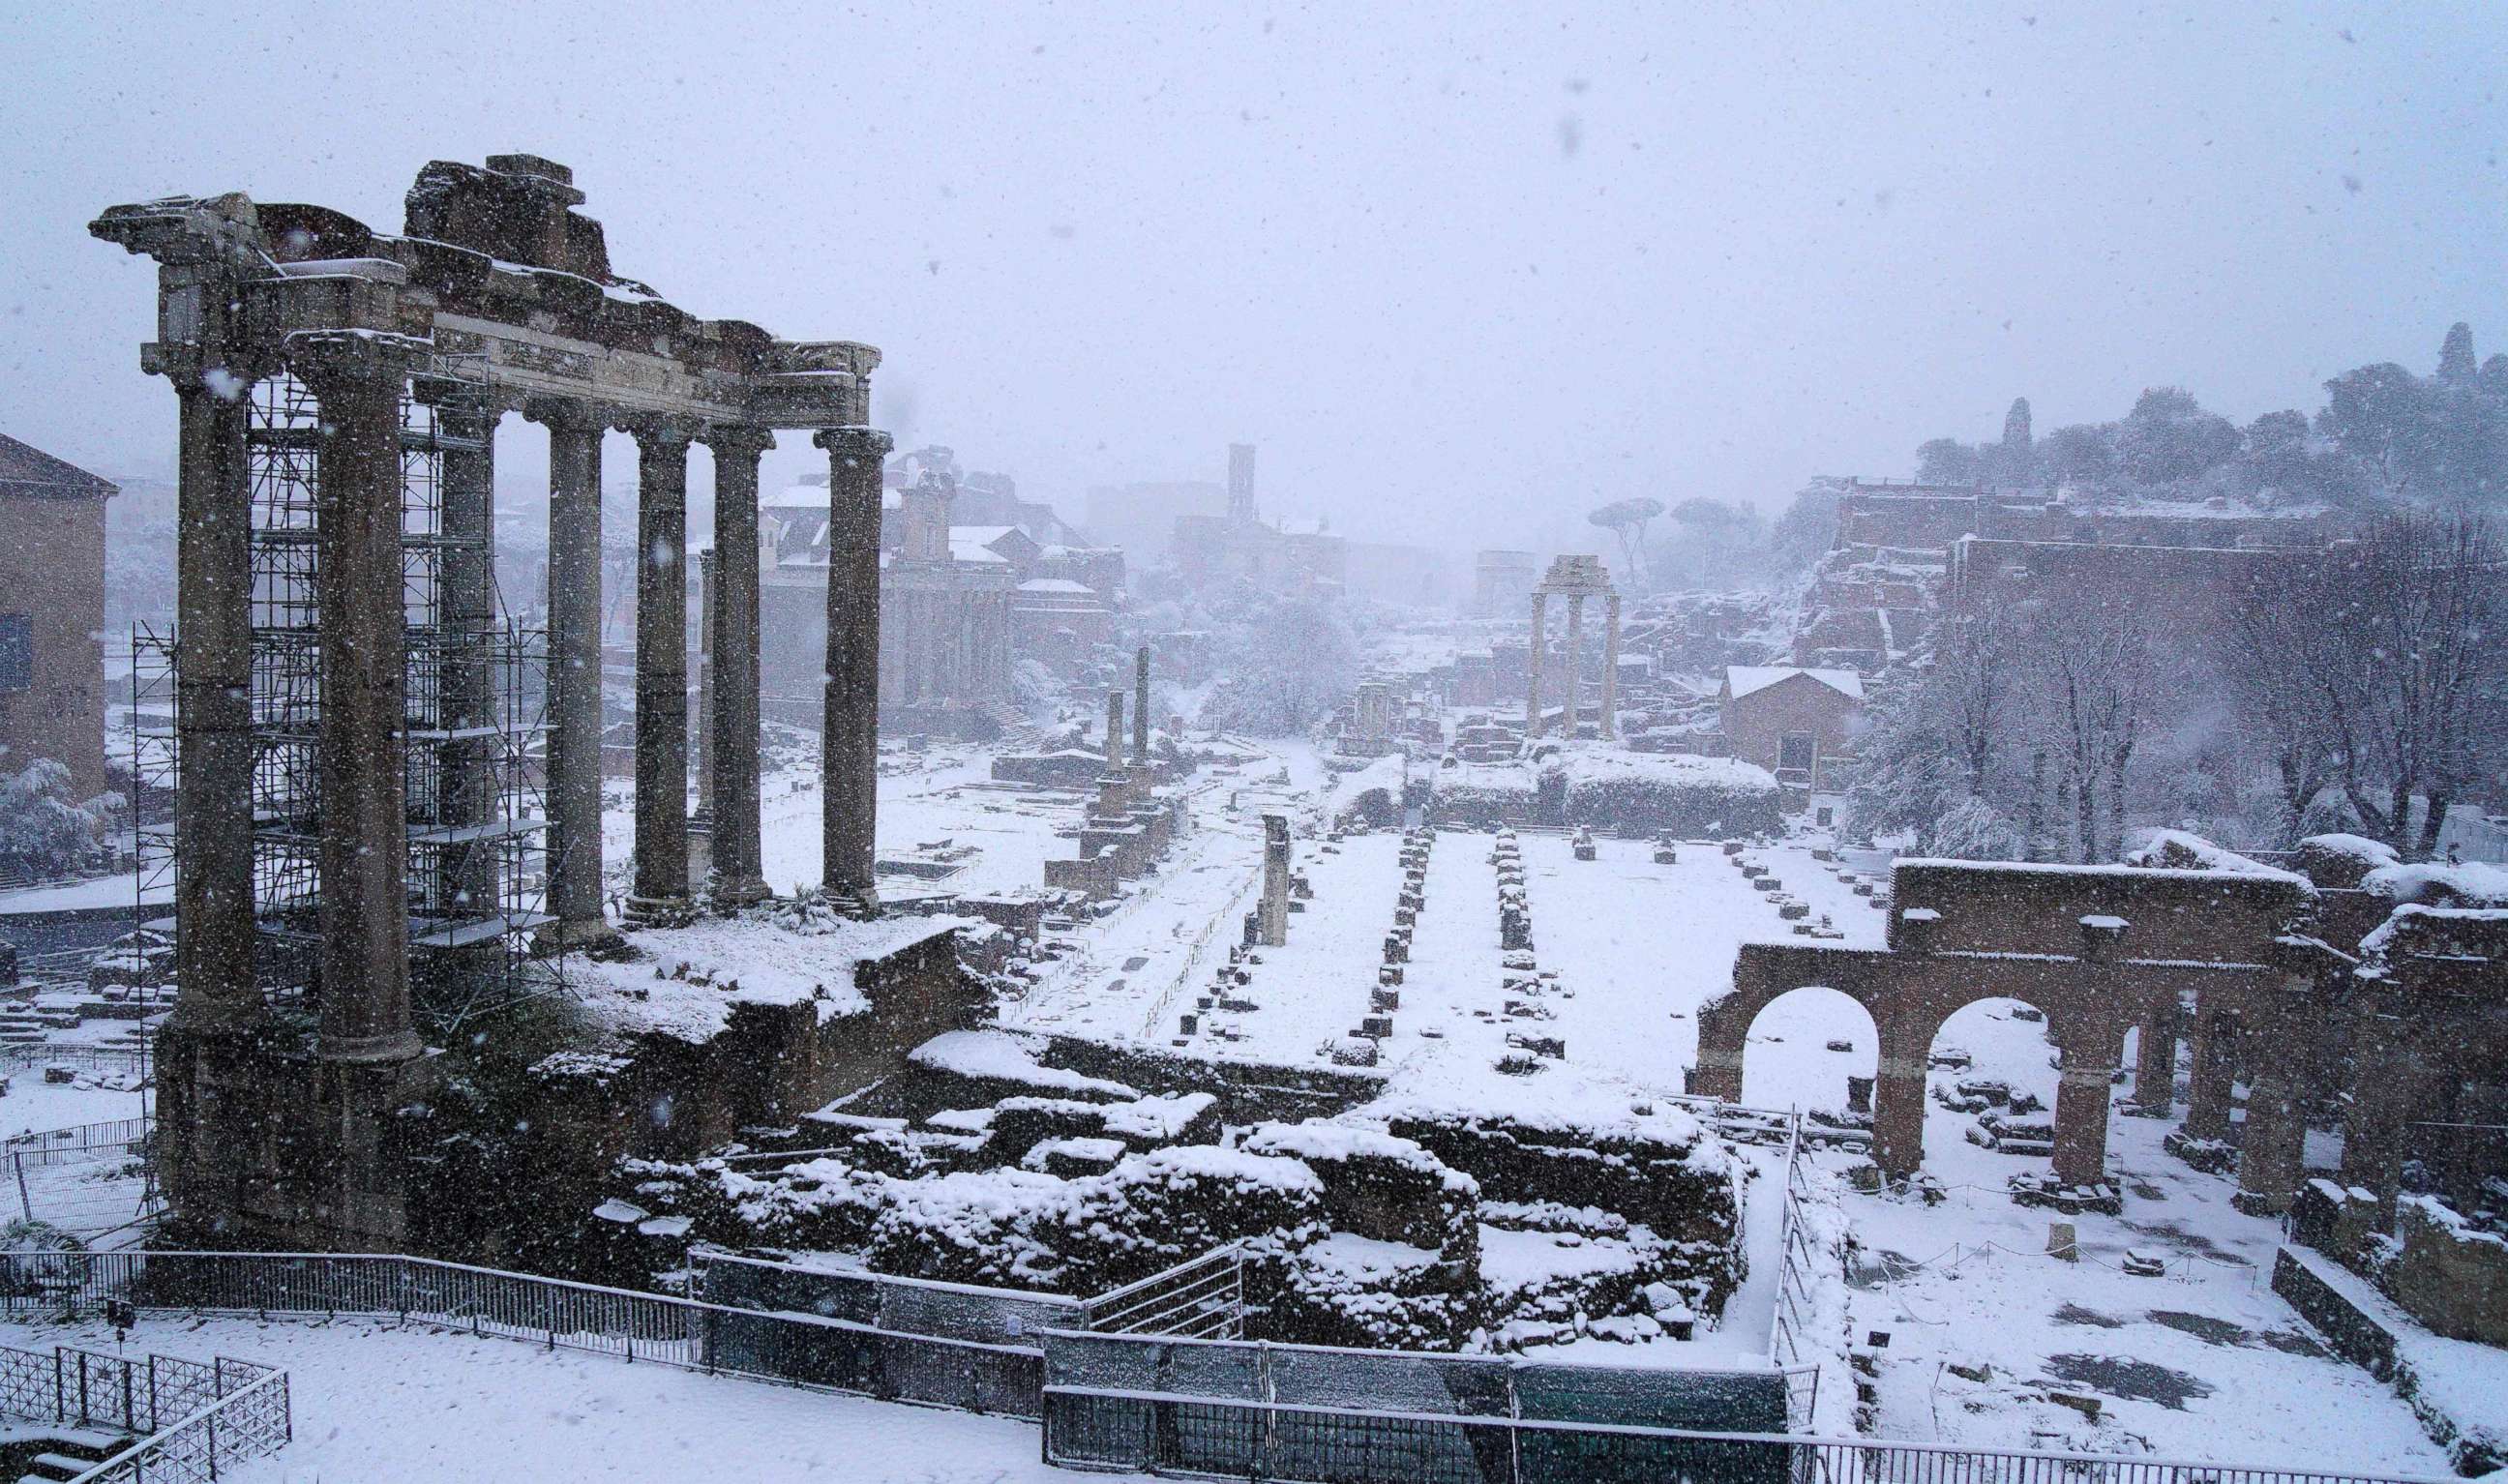 PHOTO: The Ancient Forum during a snowfall in Rome, Feb. 26, 2018.